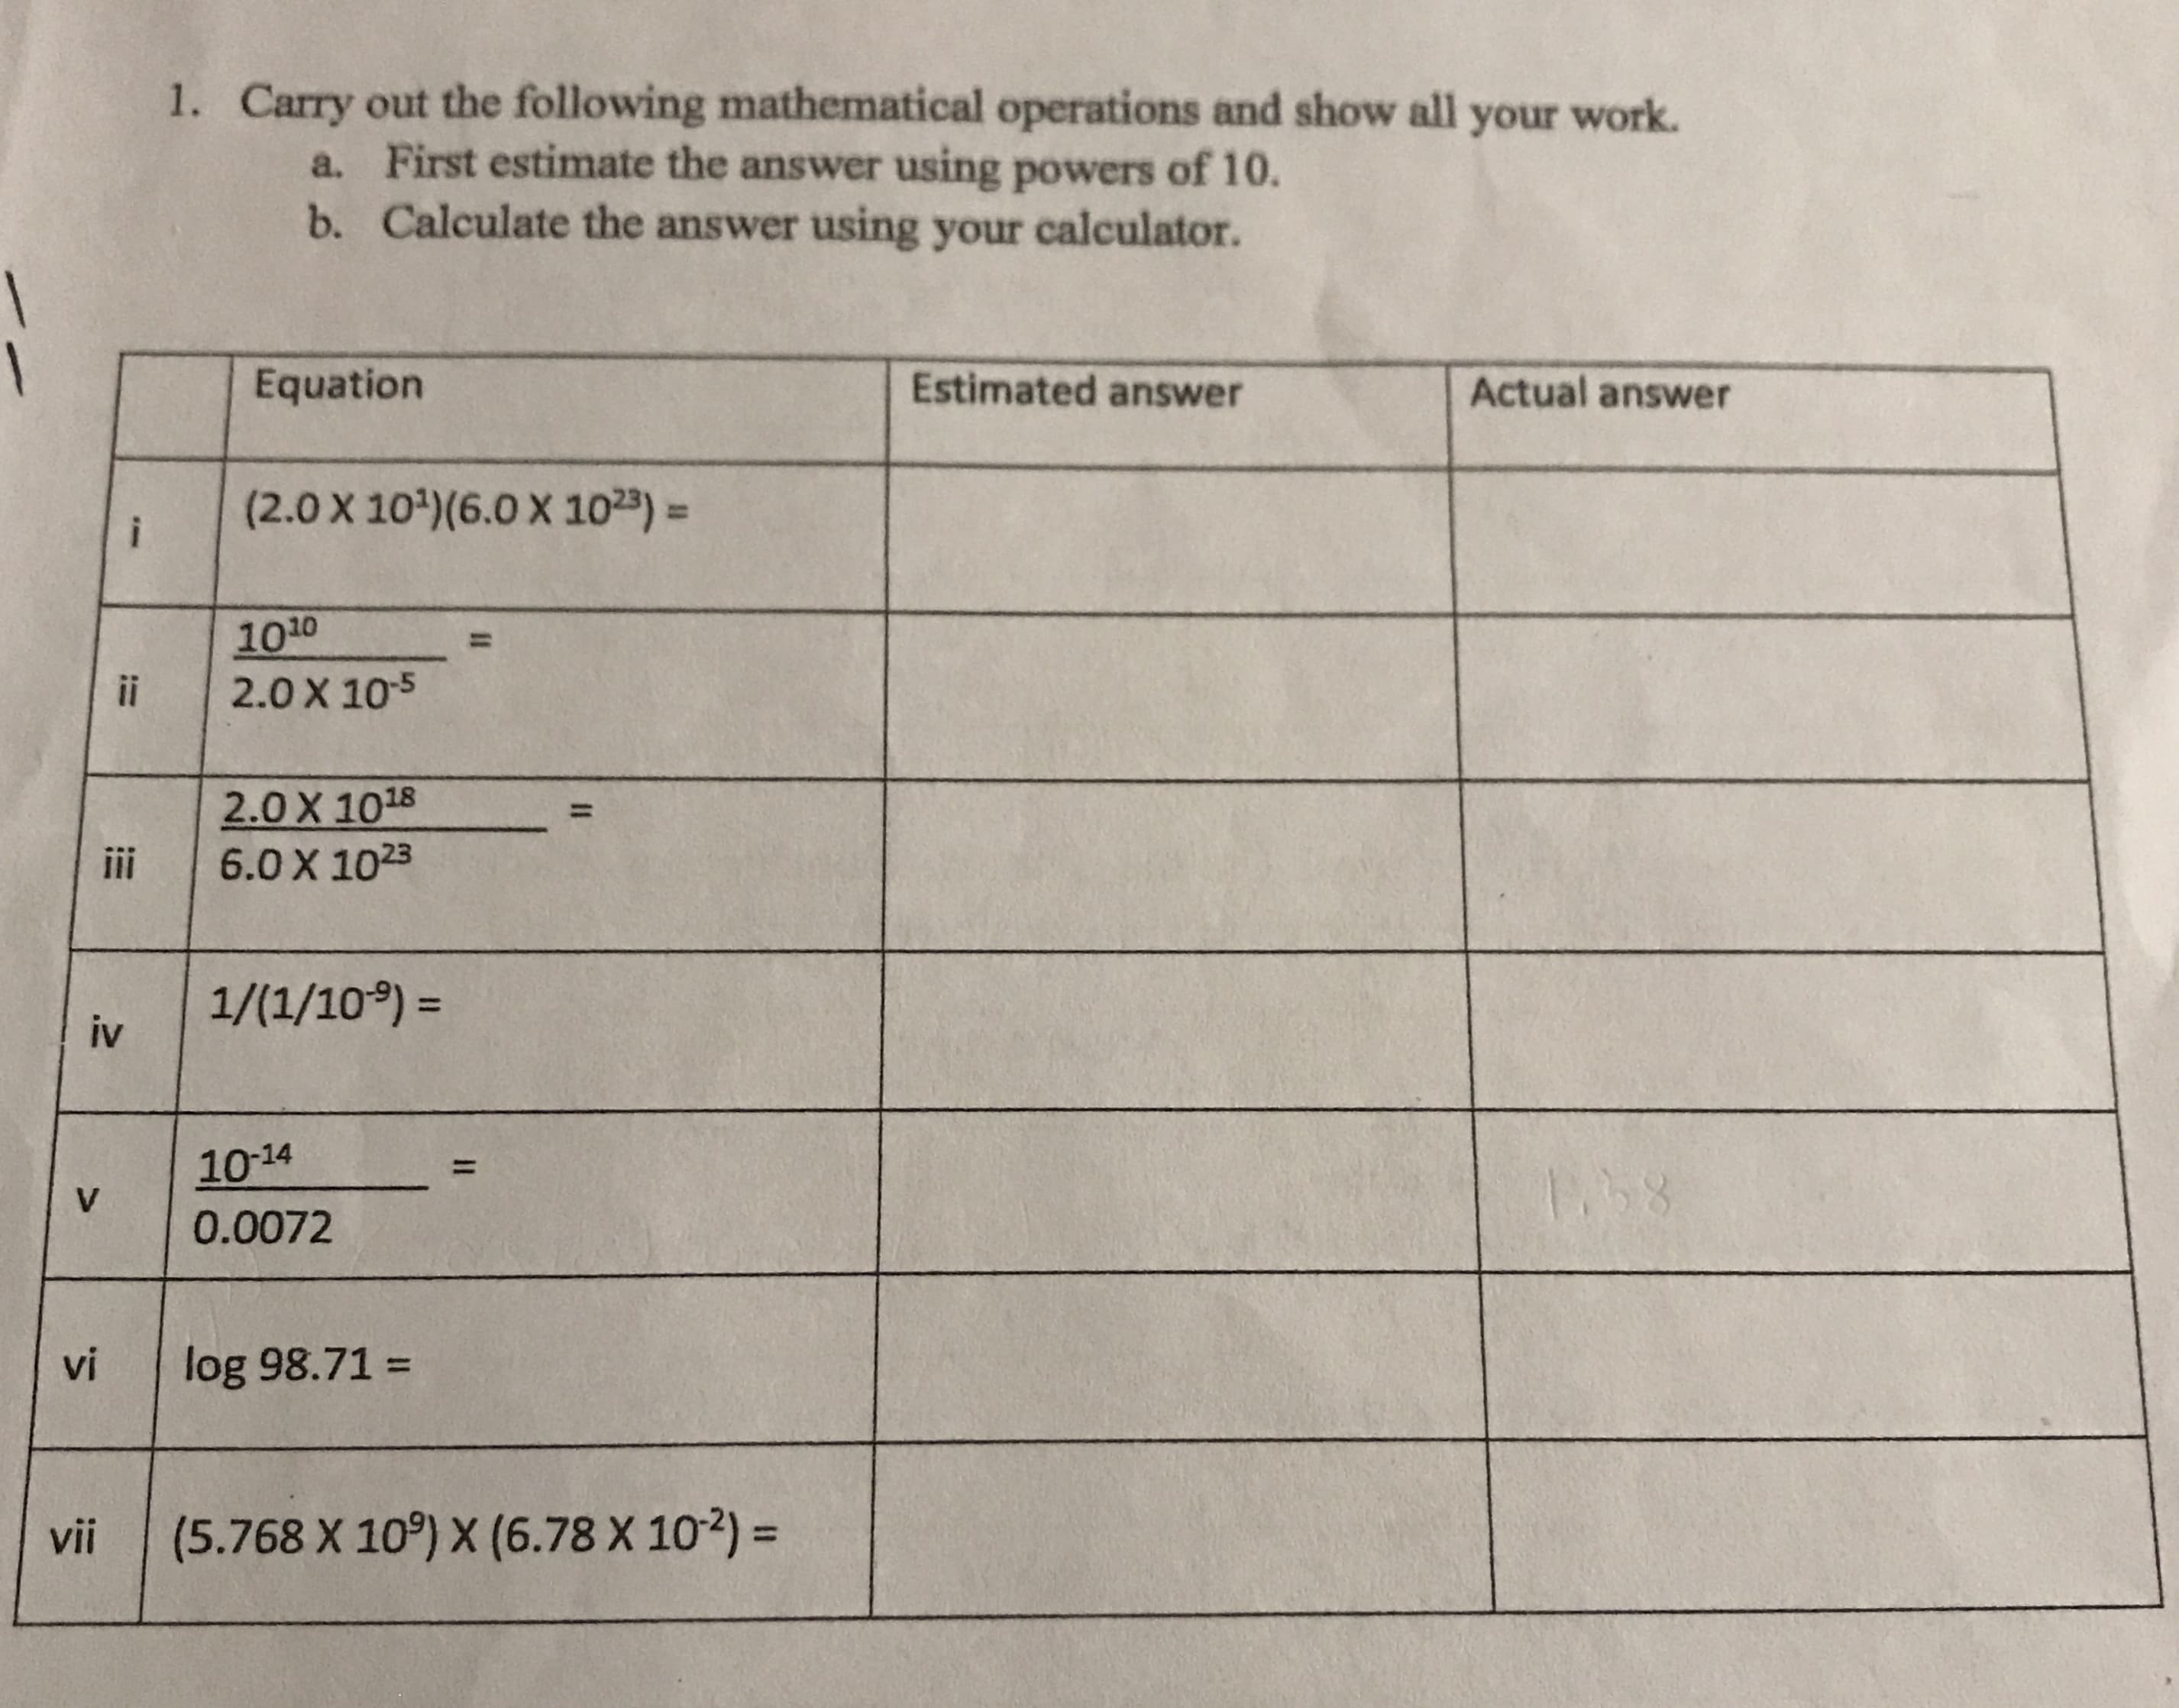 Carry out the following mathematical operations and show all your work.
a. First estimate the answer using powers of 10.
b. Calculate the answer using your calculator.
1.
1
Equation
Estimated answer
Actual answer
(2.0 X 10) (6.0 X 1023)
i
1010
2.0 X 105
1
ii
2.0 X 1018
6.0 X 1023
ii
1/(1/10)=
iv
10-14
11
1.58
V
0.0072
log 98.71=
vi
(5.768 X 10) X (6.78 X 102) =
vii
II
